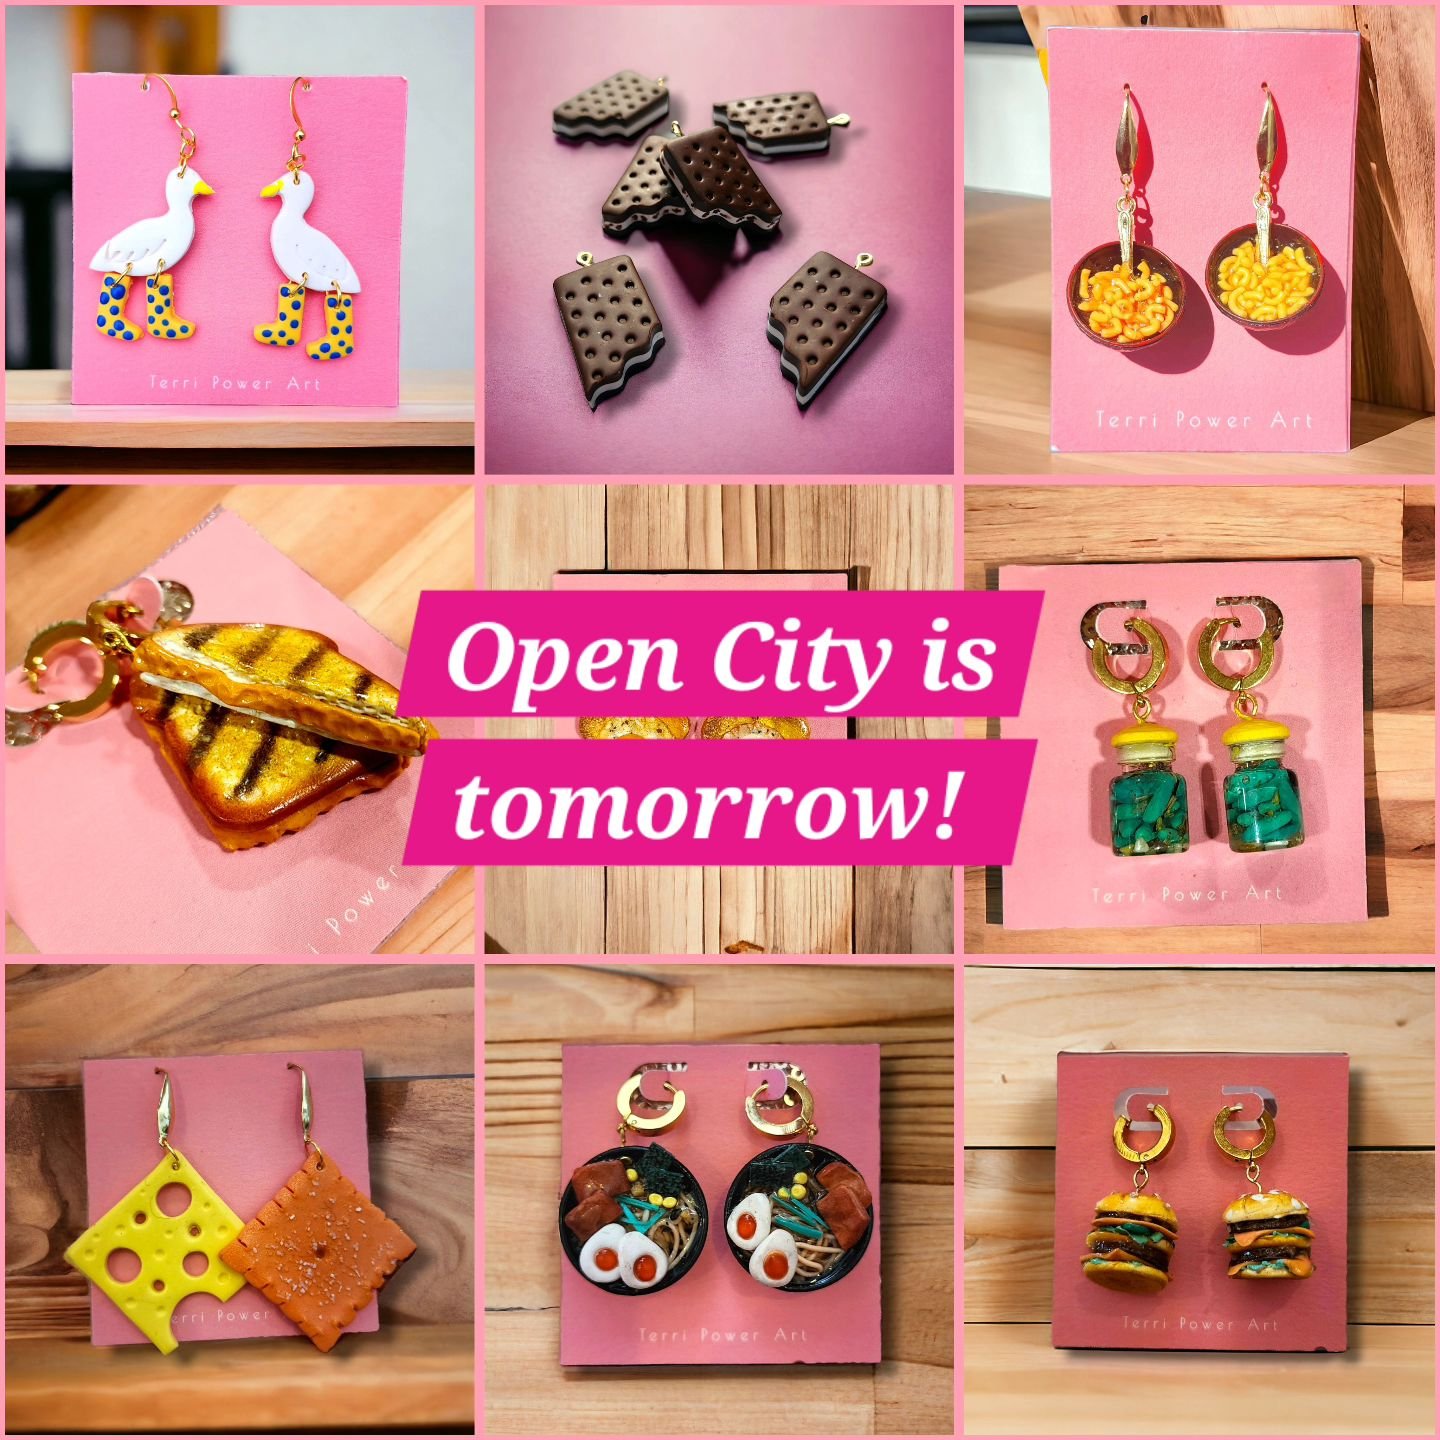 Open City is tomorrow! You can fine me at @dartgalleryns from 11 til 4. 
.
 #terripowerart #handmade  #instaartist #wearableart #polymerclay #clayearrings  #downtowndartmouth #handmadejewelry #polymerclayjewelry #polymerclayearrings #handmadeearrings